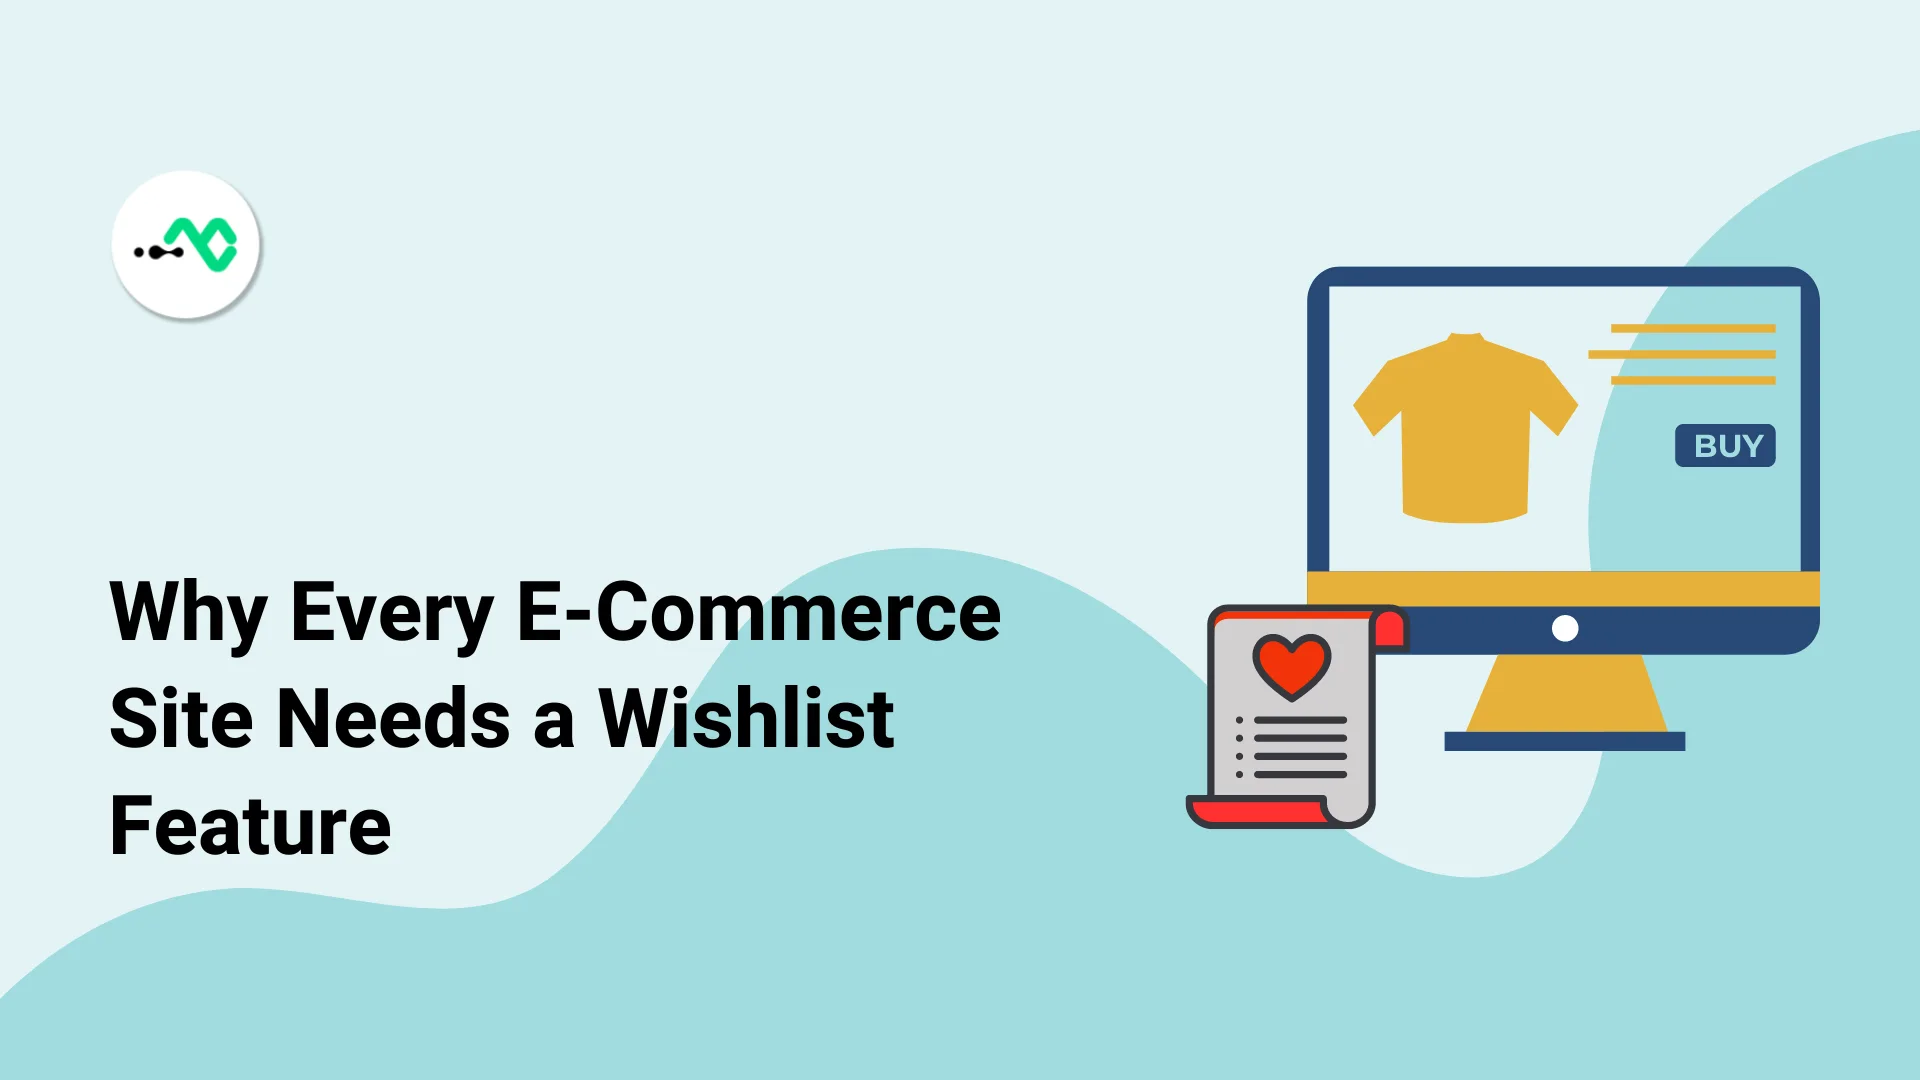 Why Wishlists Are an Important Feature in E-Commerce